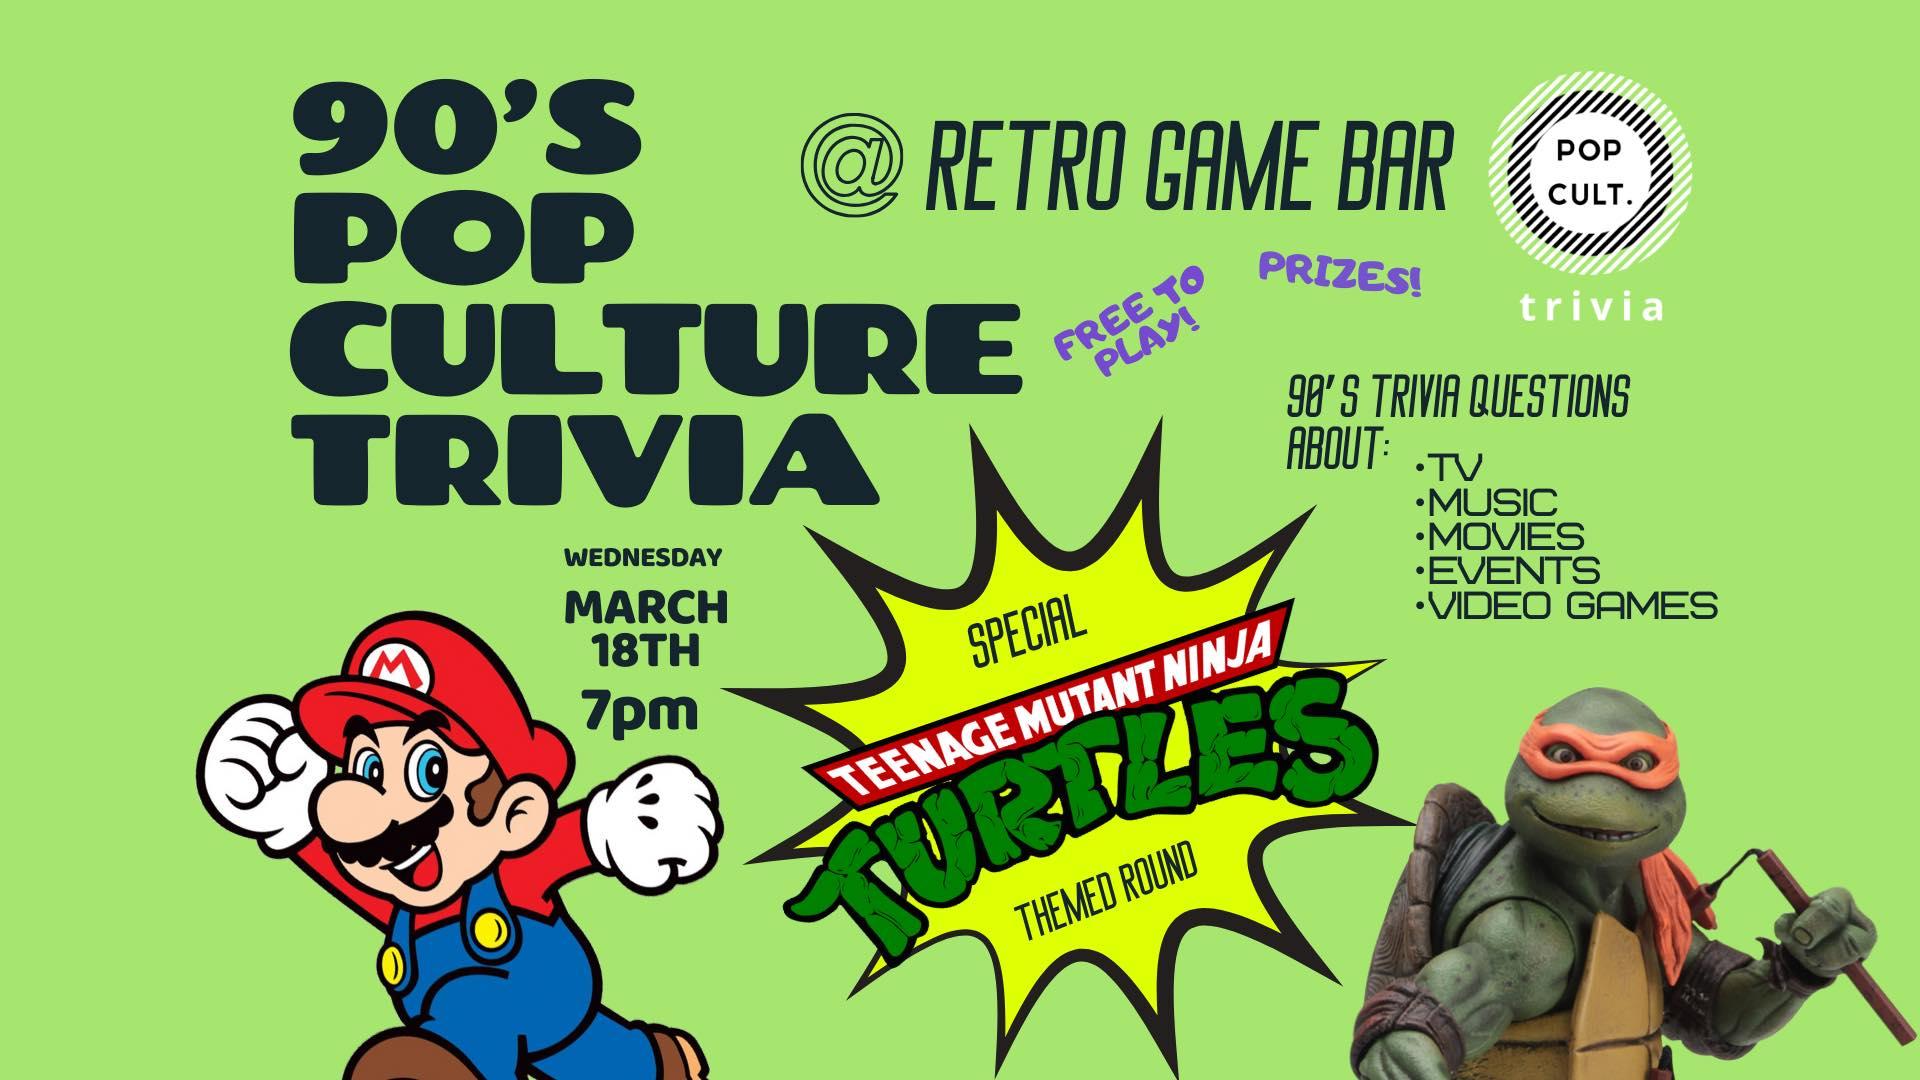 90s Pop Culture Trivia At Retro Game Bar With Tmnt Themed Round 18 Mar 2020